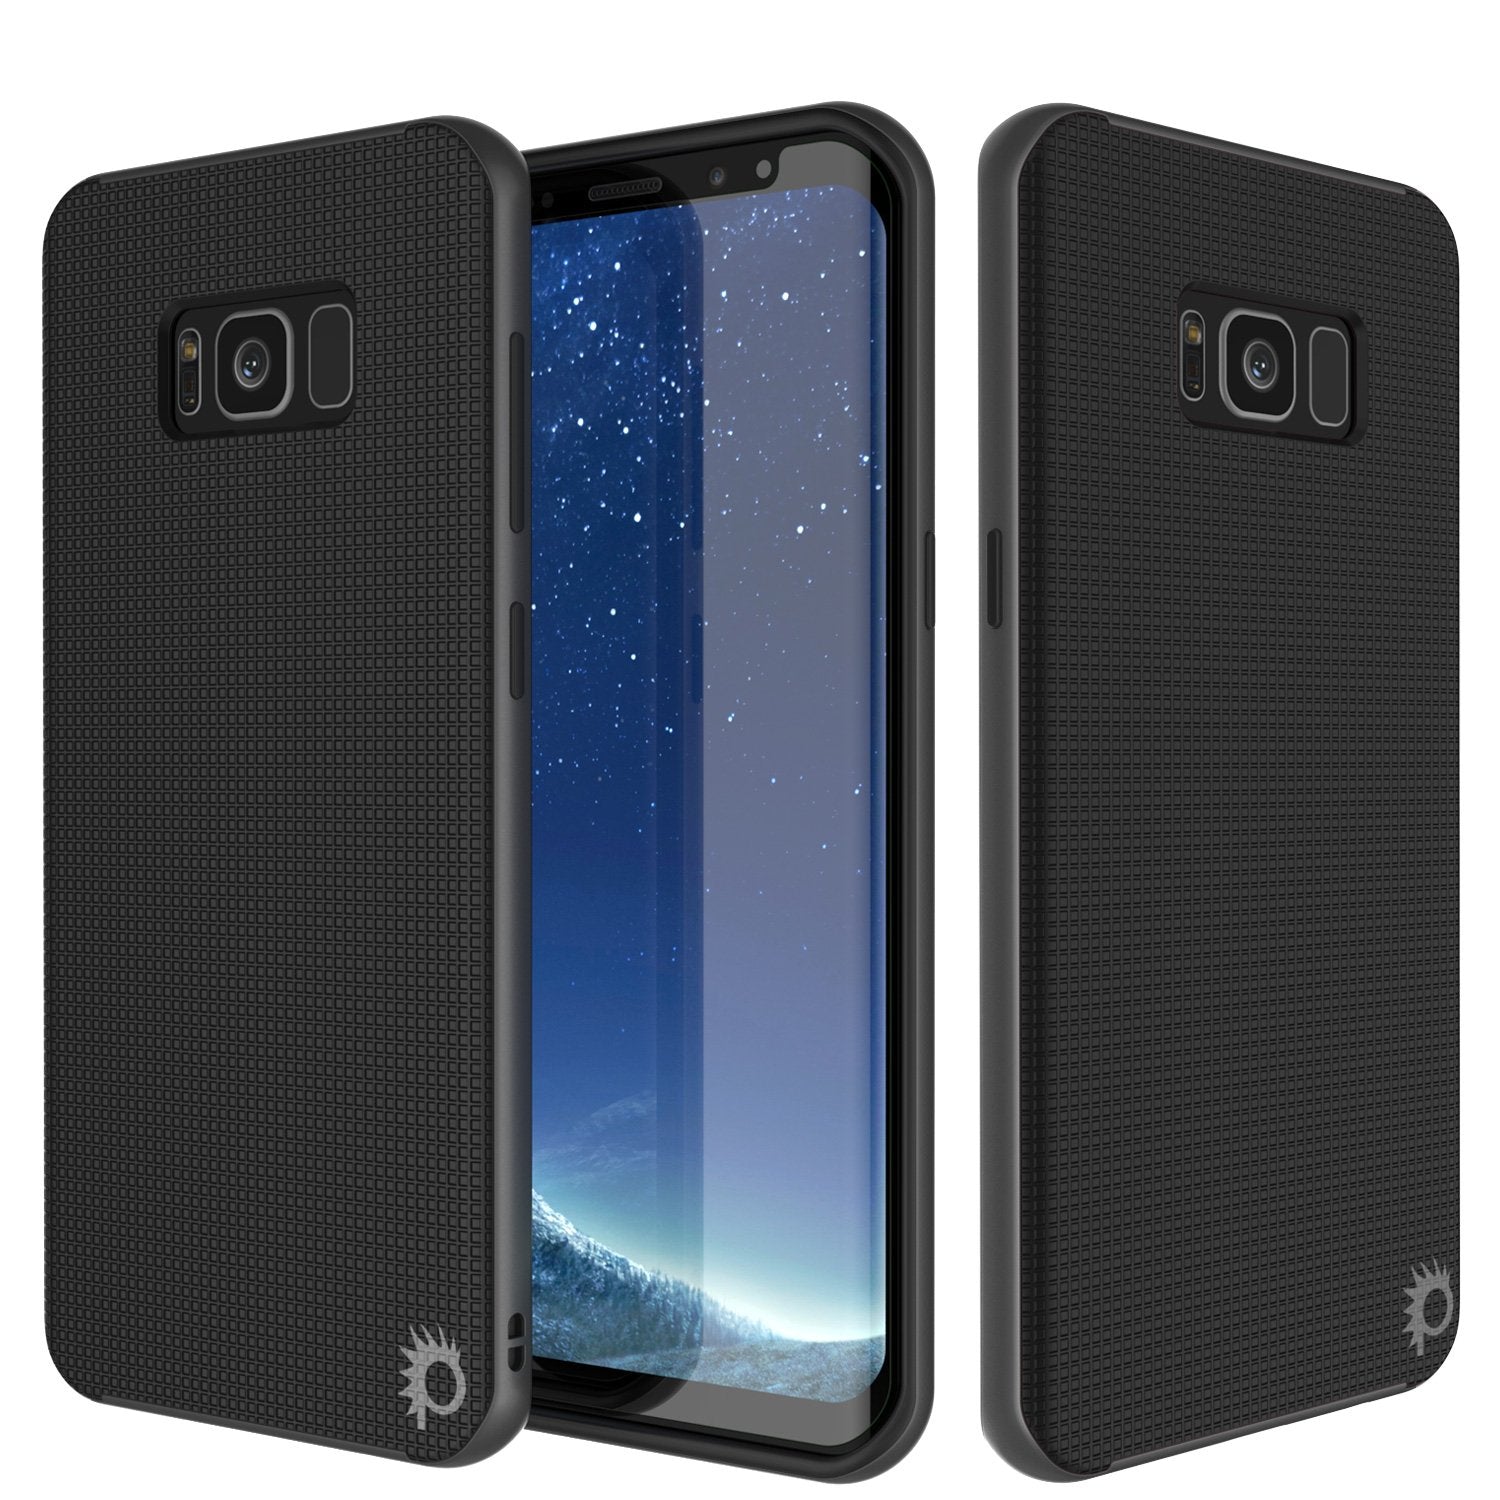 Galaxy S8 PLUS Case, PunkCase [Stealth Series] Hybrid 3-Piece Shockproof Dual Layer Cover [Non-Slip] [Soft TPU + PC Bumper] with PUNKSHIELD Screen Protector for Samsung S8+ [Grey]